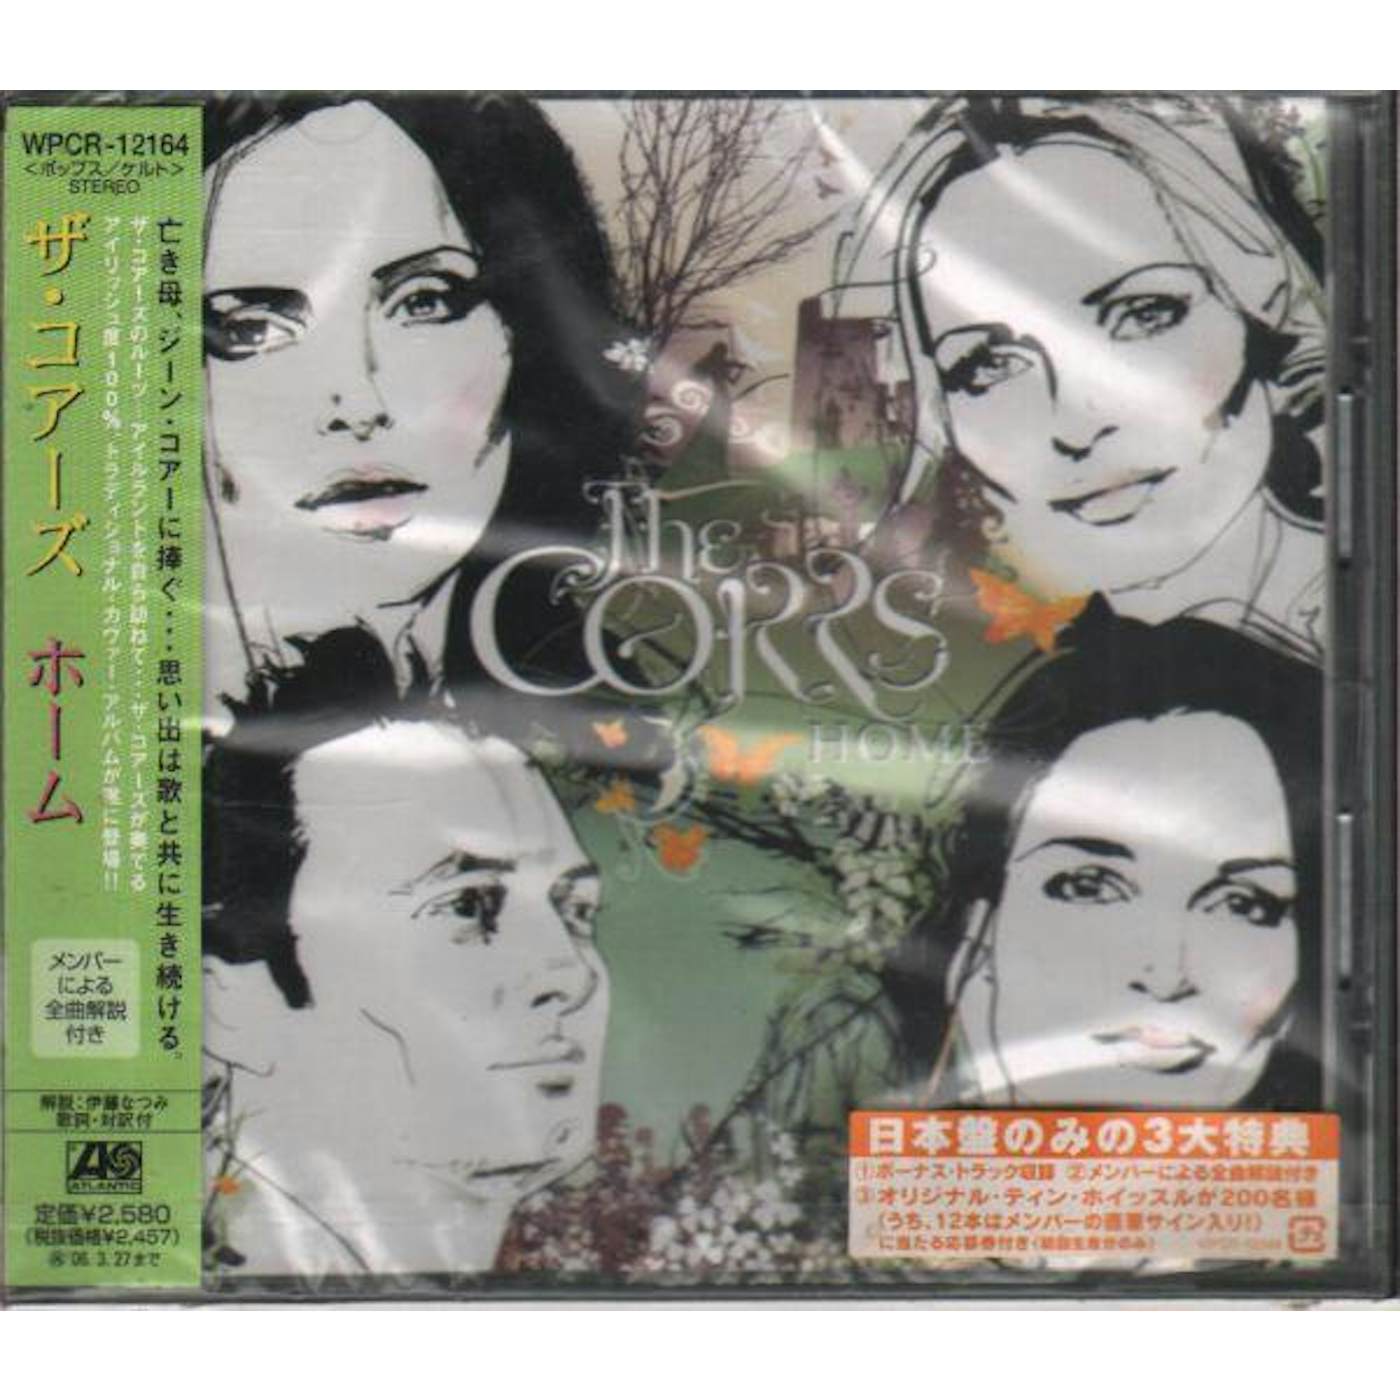 The Corrs HOME CD